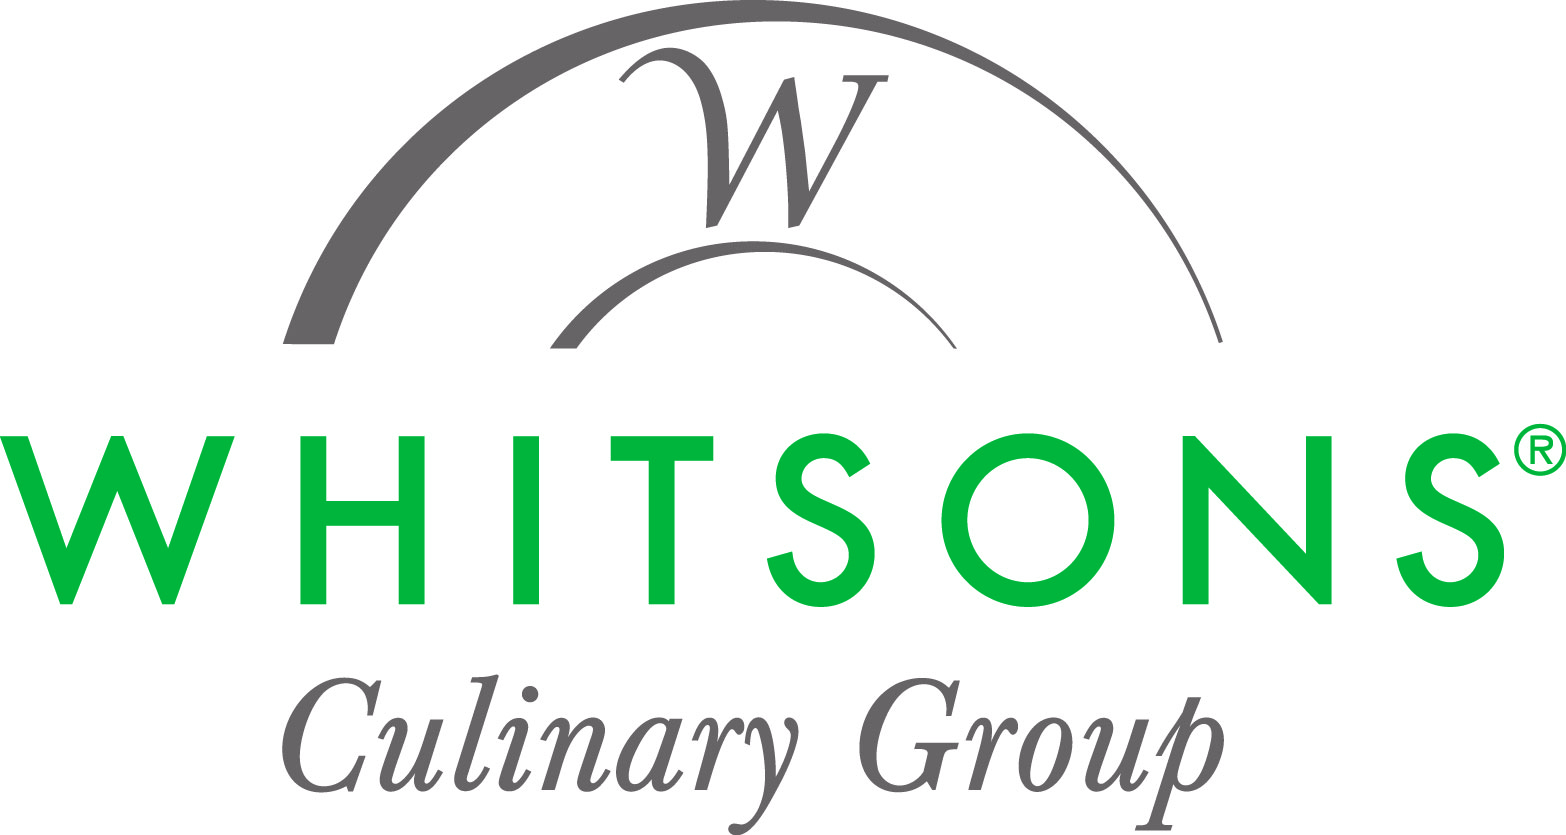 GenNx360 Capital Partners Announces Whitsons Culinary Group Acquisition of Lintons Food Service Management